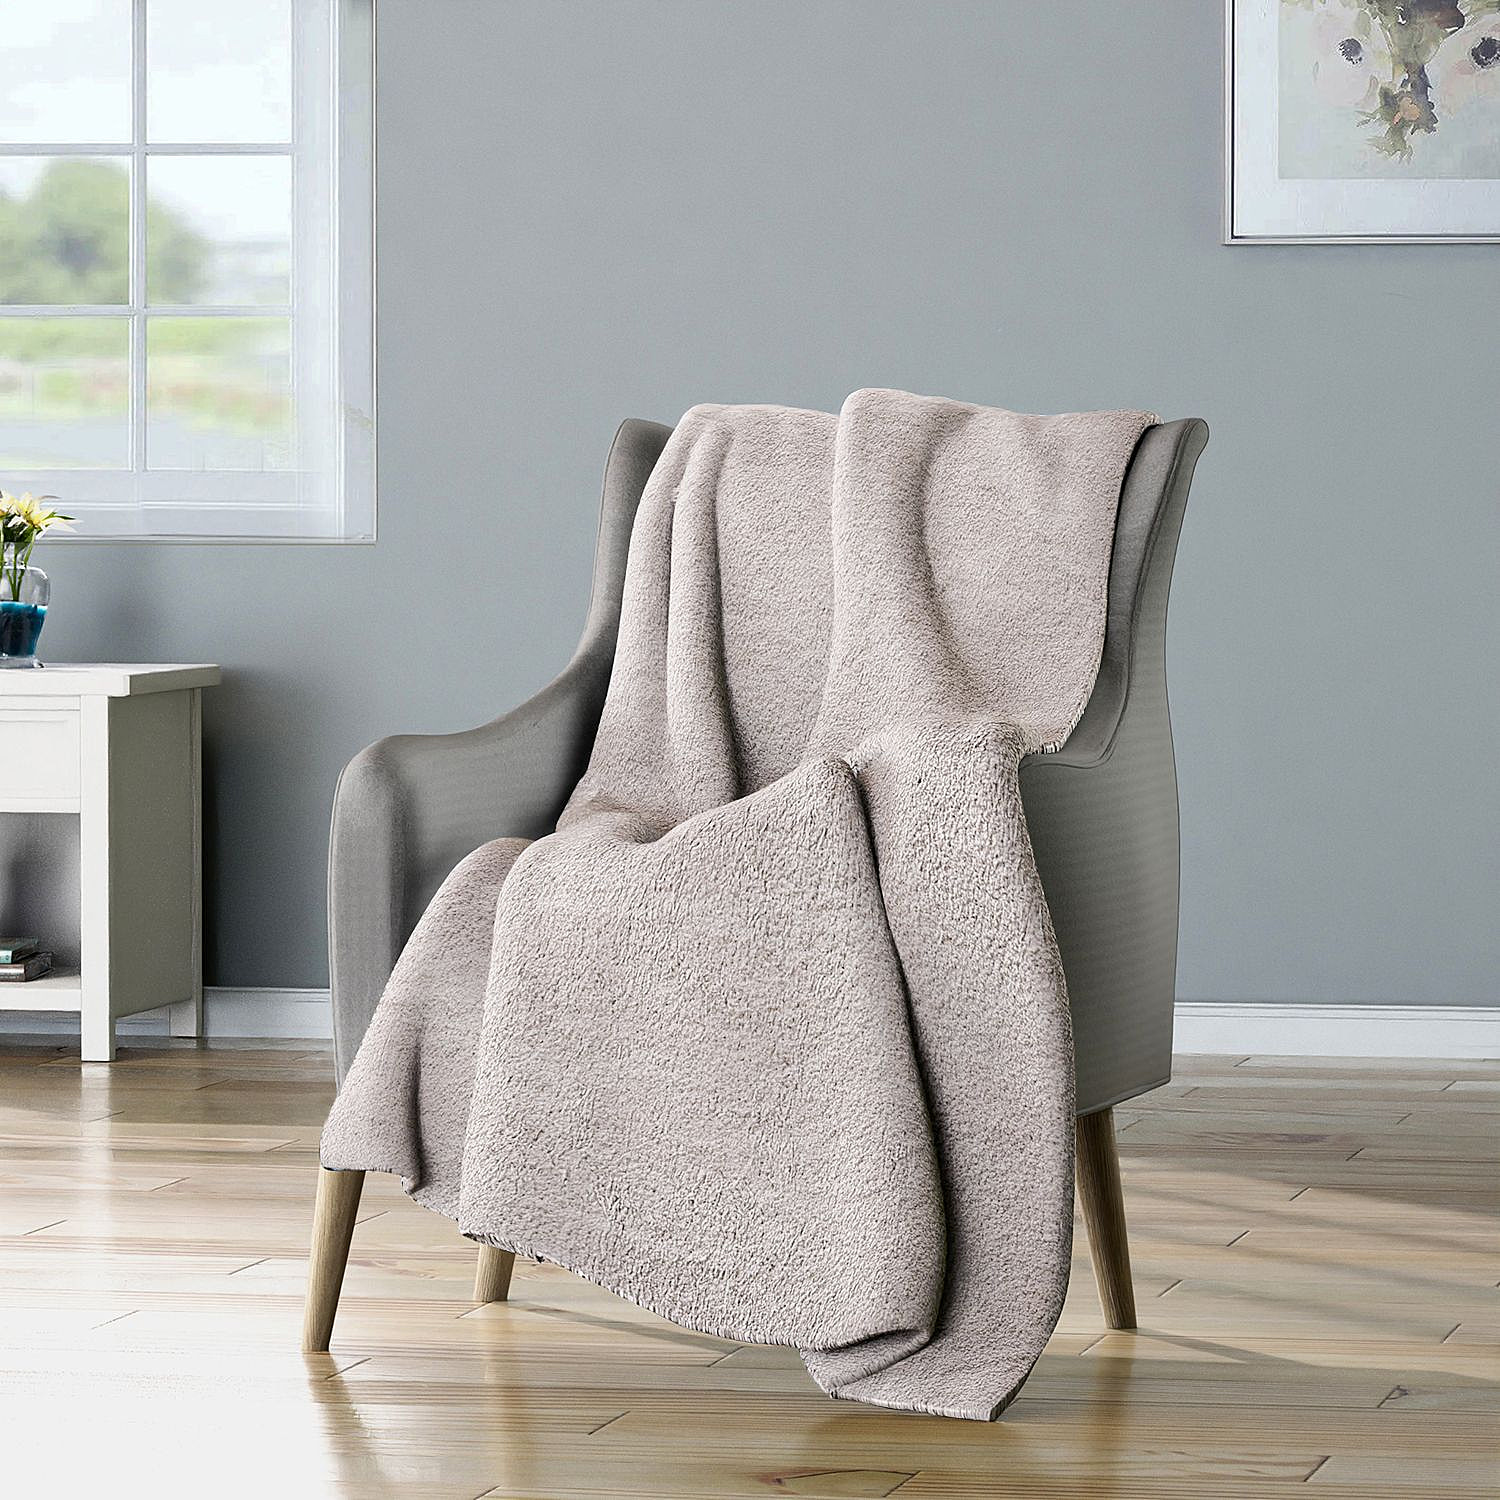 Solid-Colour-Cozy-Microfiber-Knitted-Blanket-(Size-127x152-Cm)-Coffee